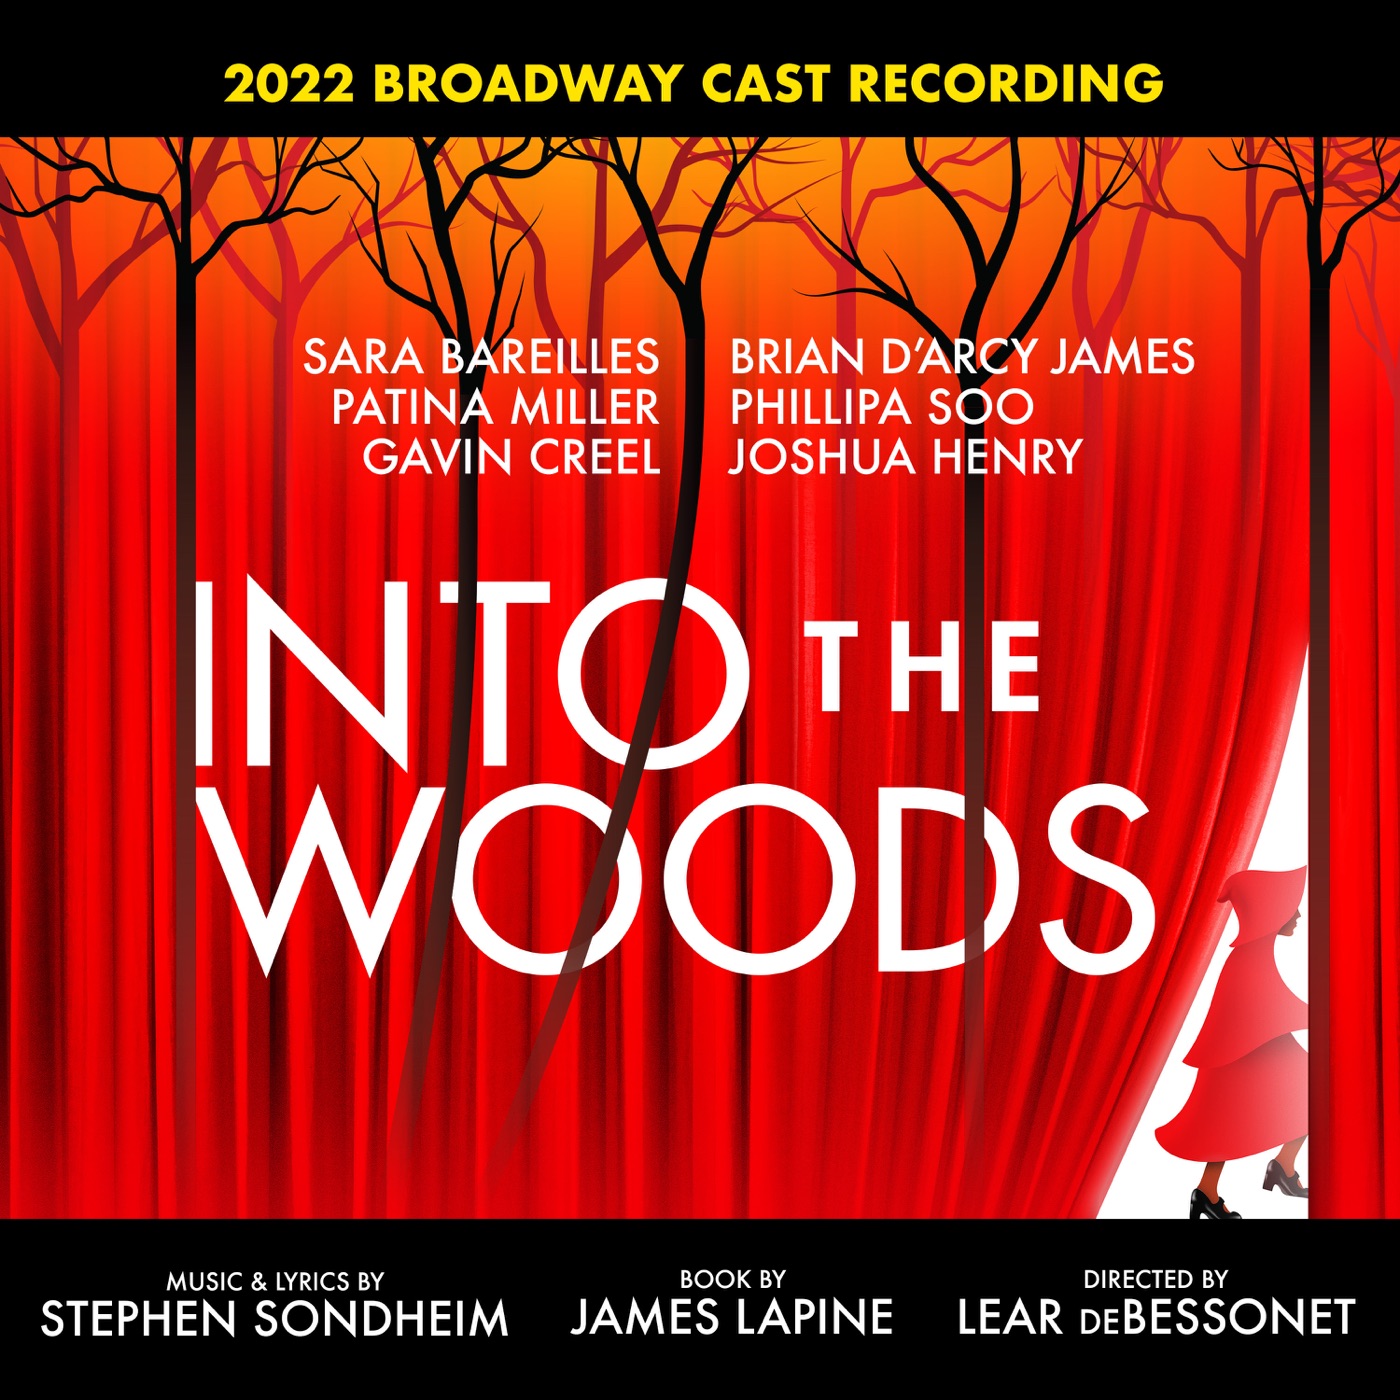 Into The Woods (2022 Broadway Cast Recording) by Sara Bareilles, Stephen Sondheim, ‘Into The Woods’ 2022 Broadway Cast